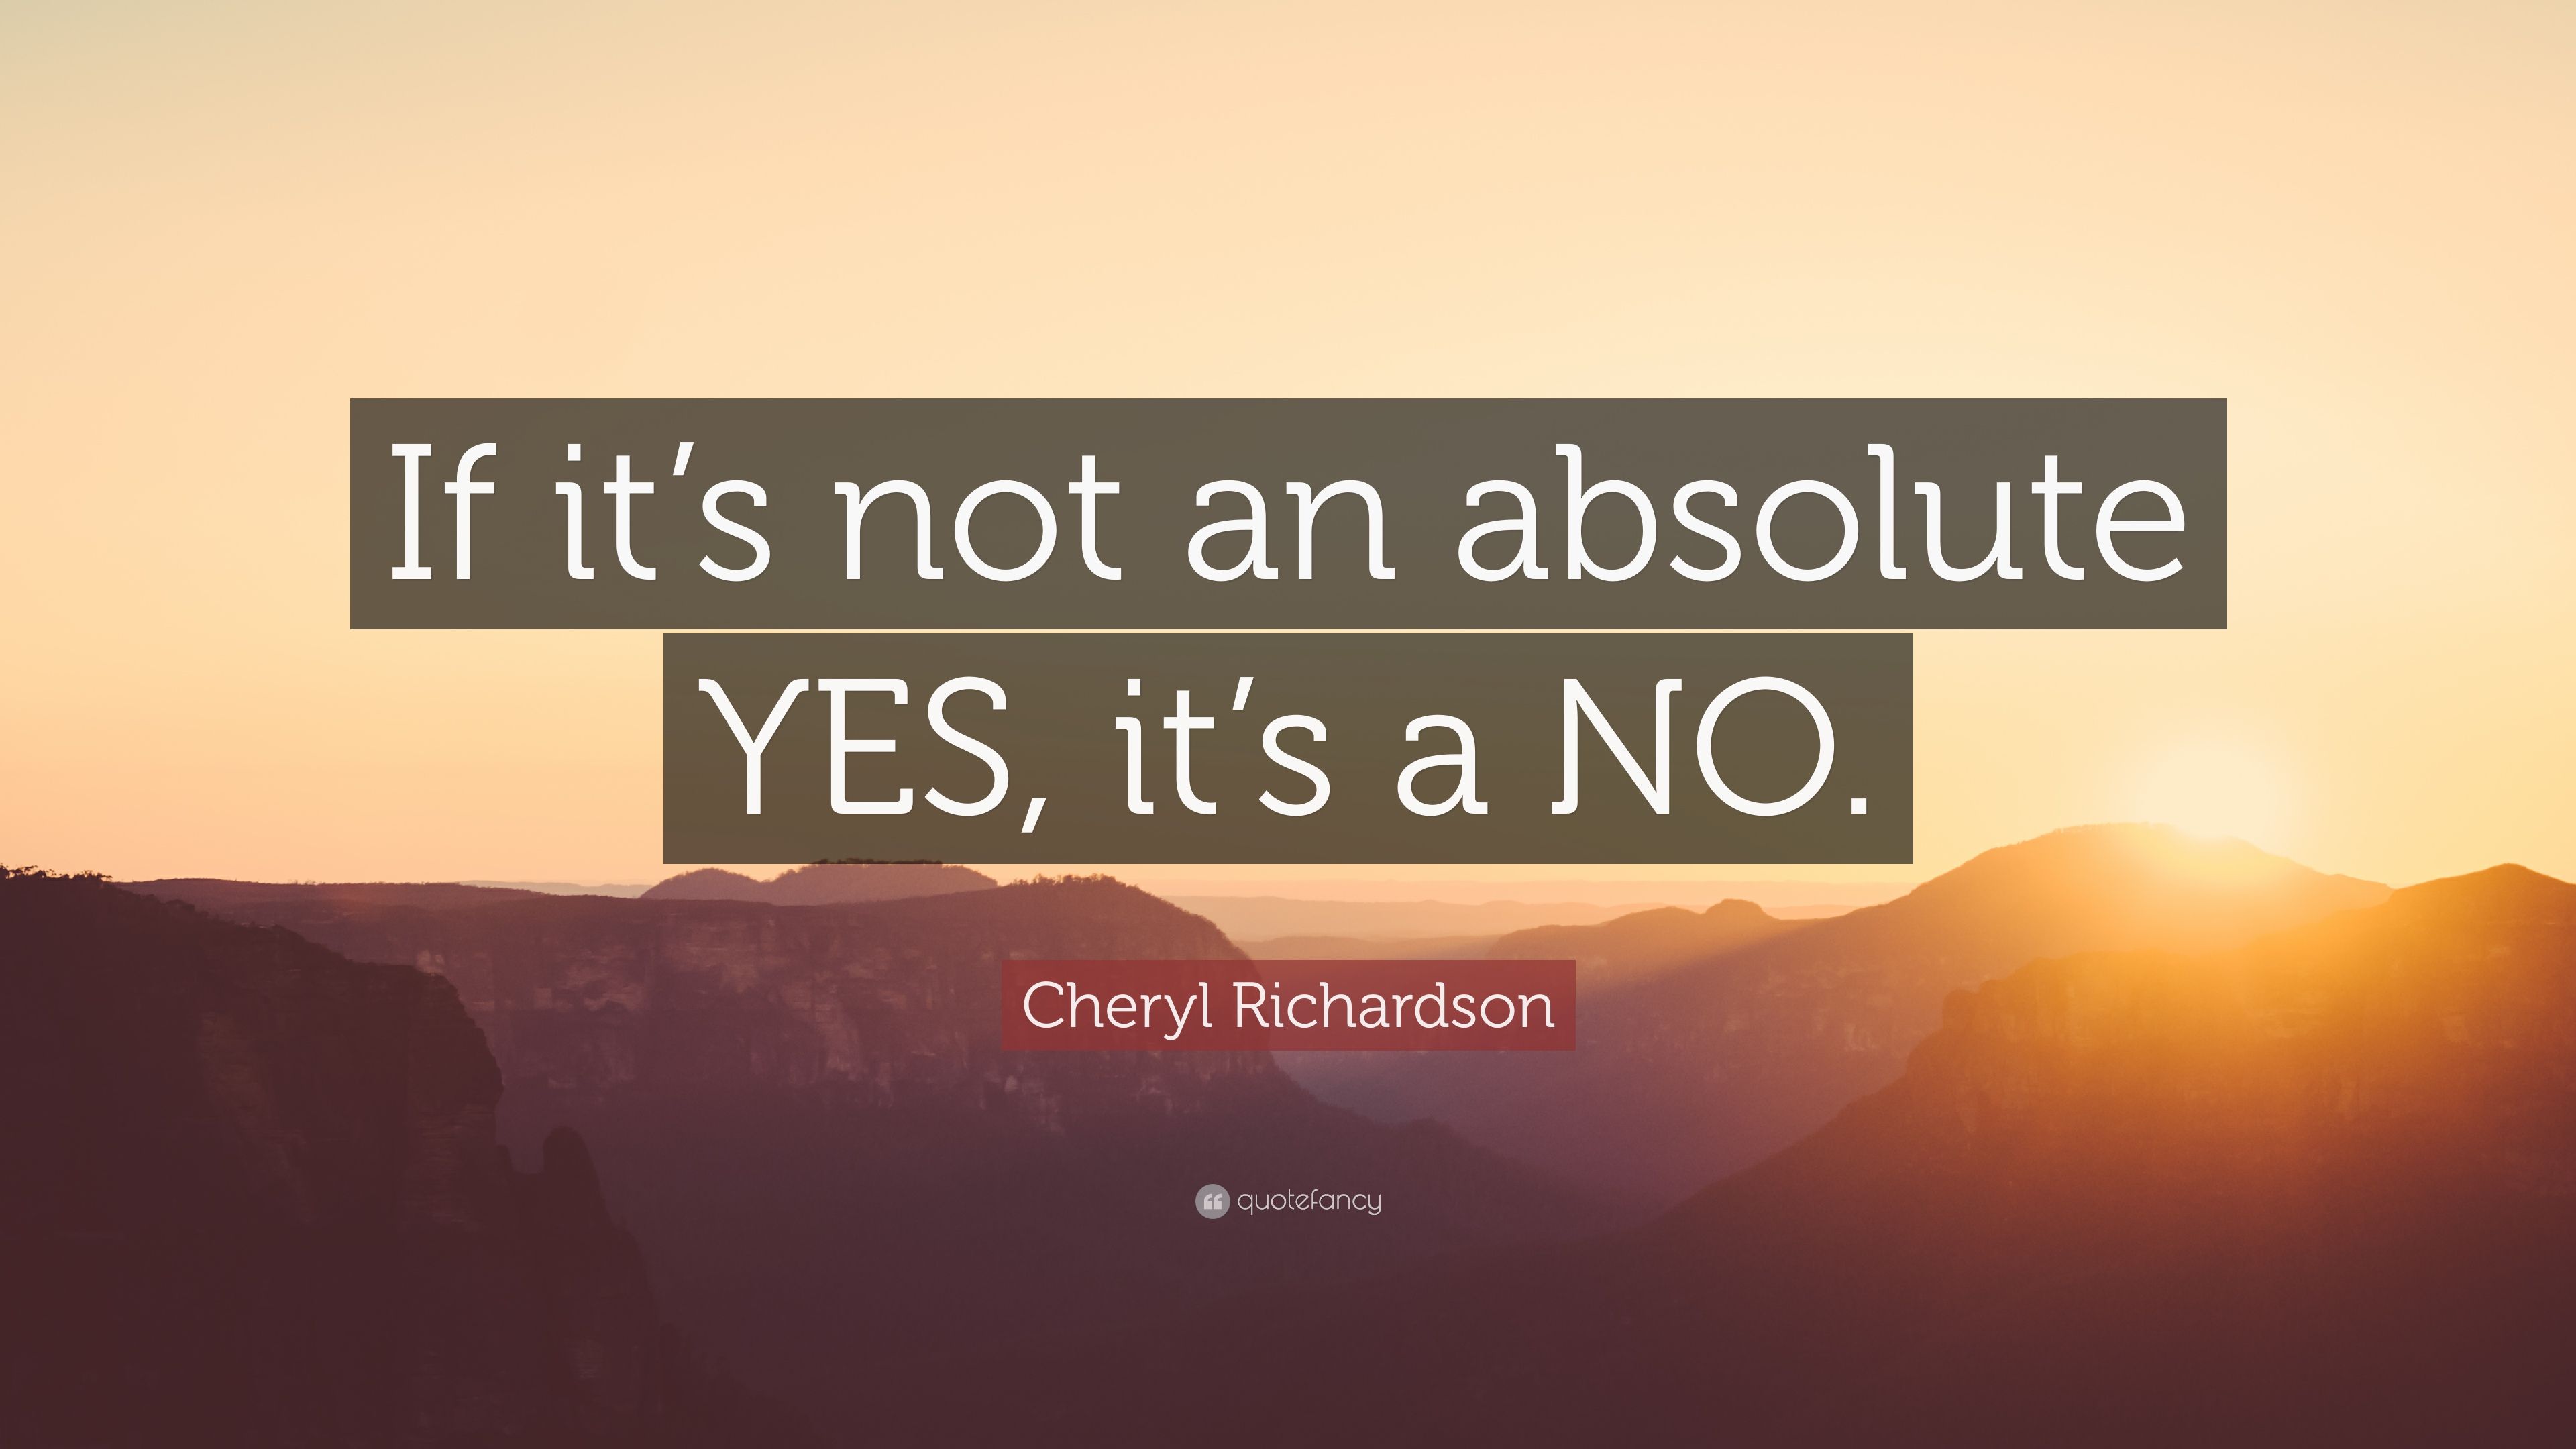 Cheryl Richardson Quote: “If it's not an absolute YES, it's a NO.” (7 wallpaper)